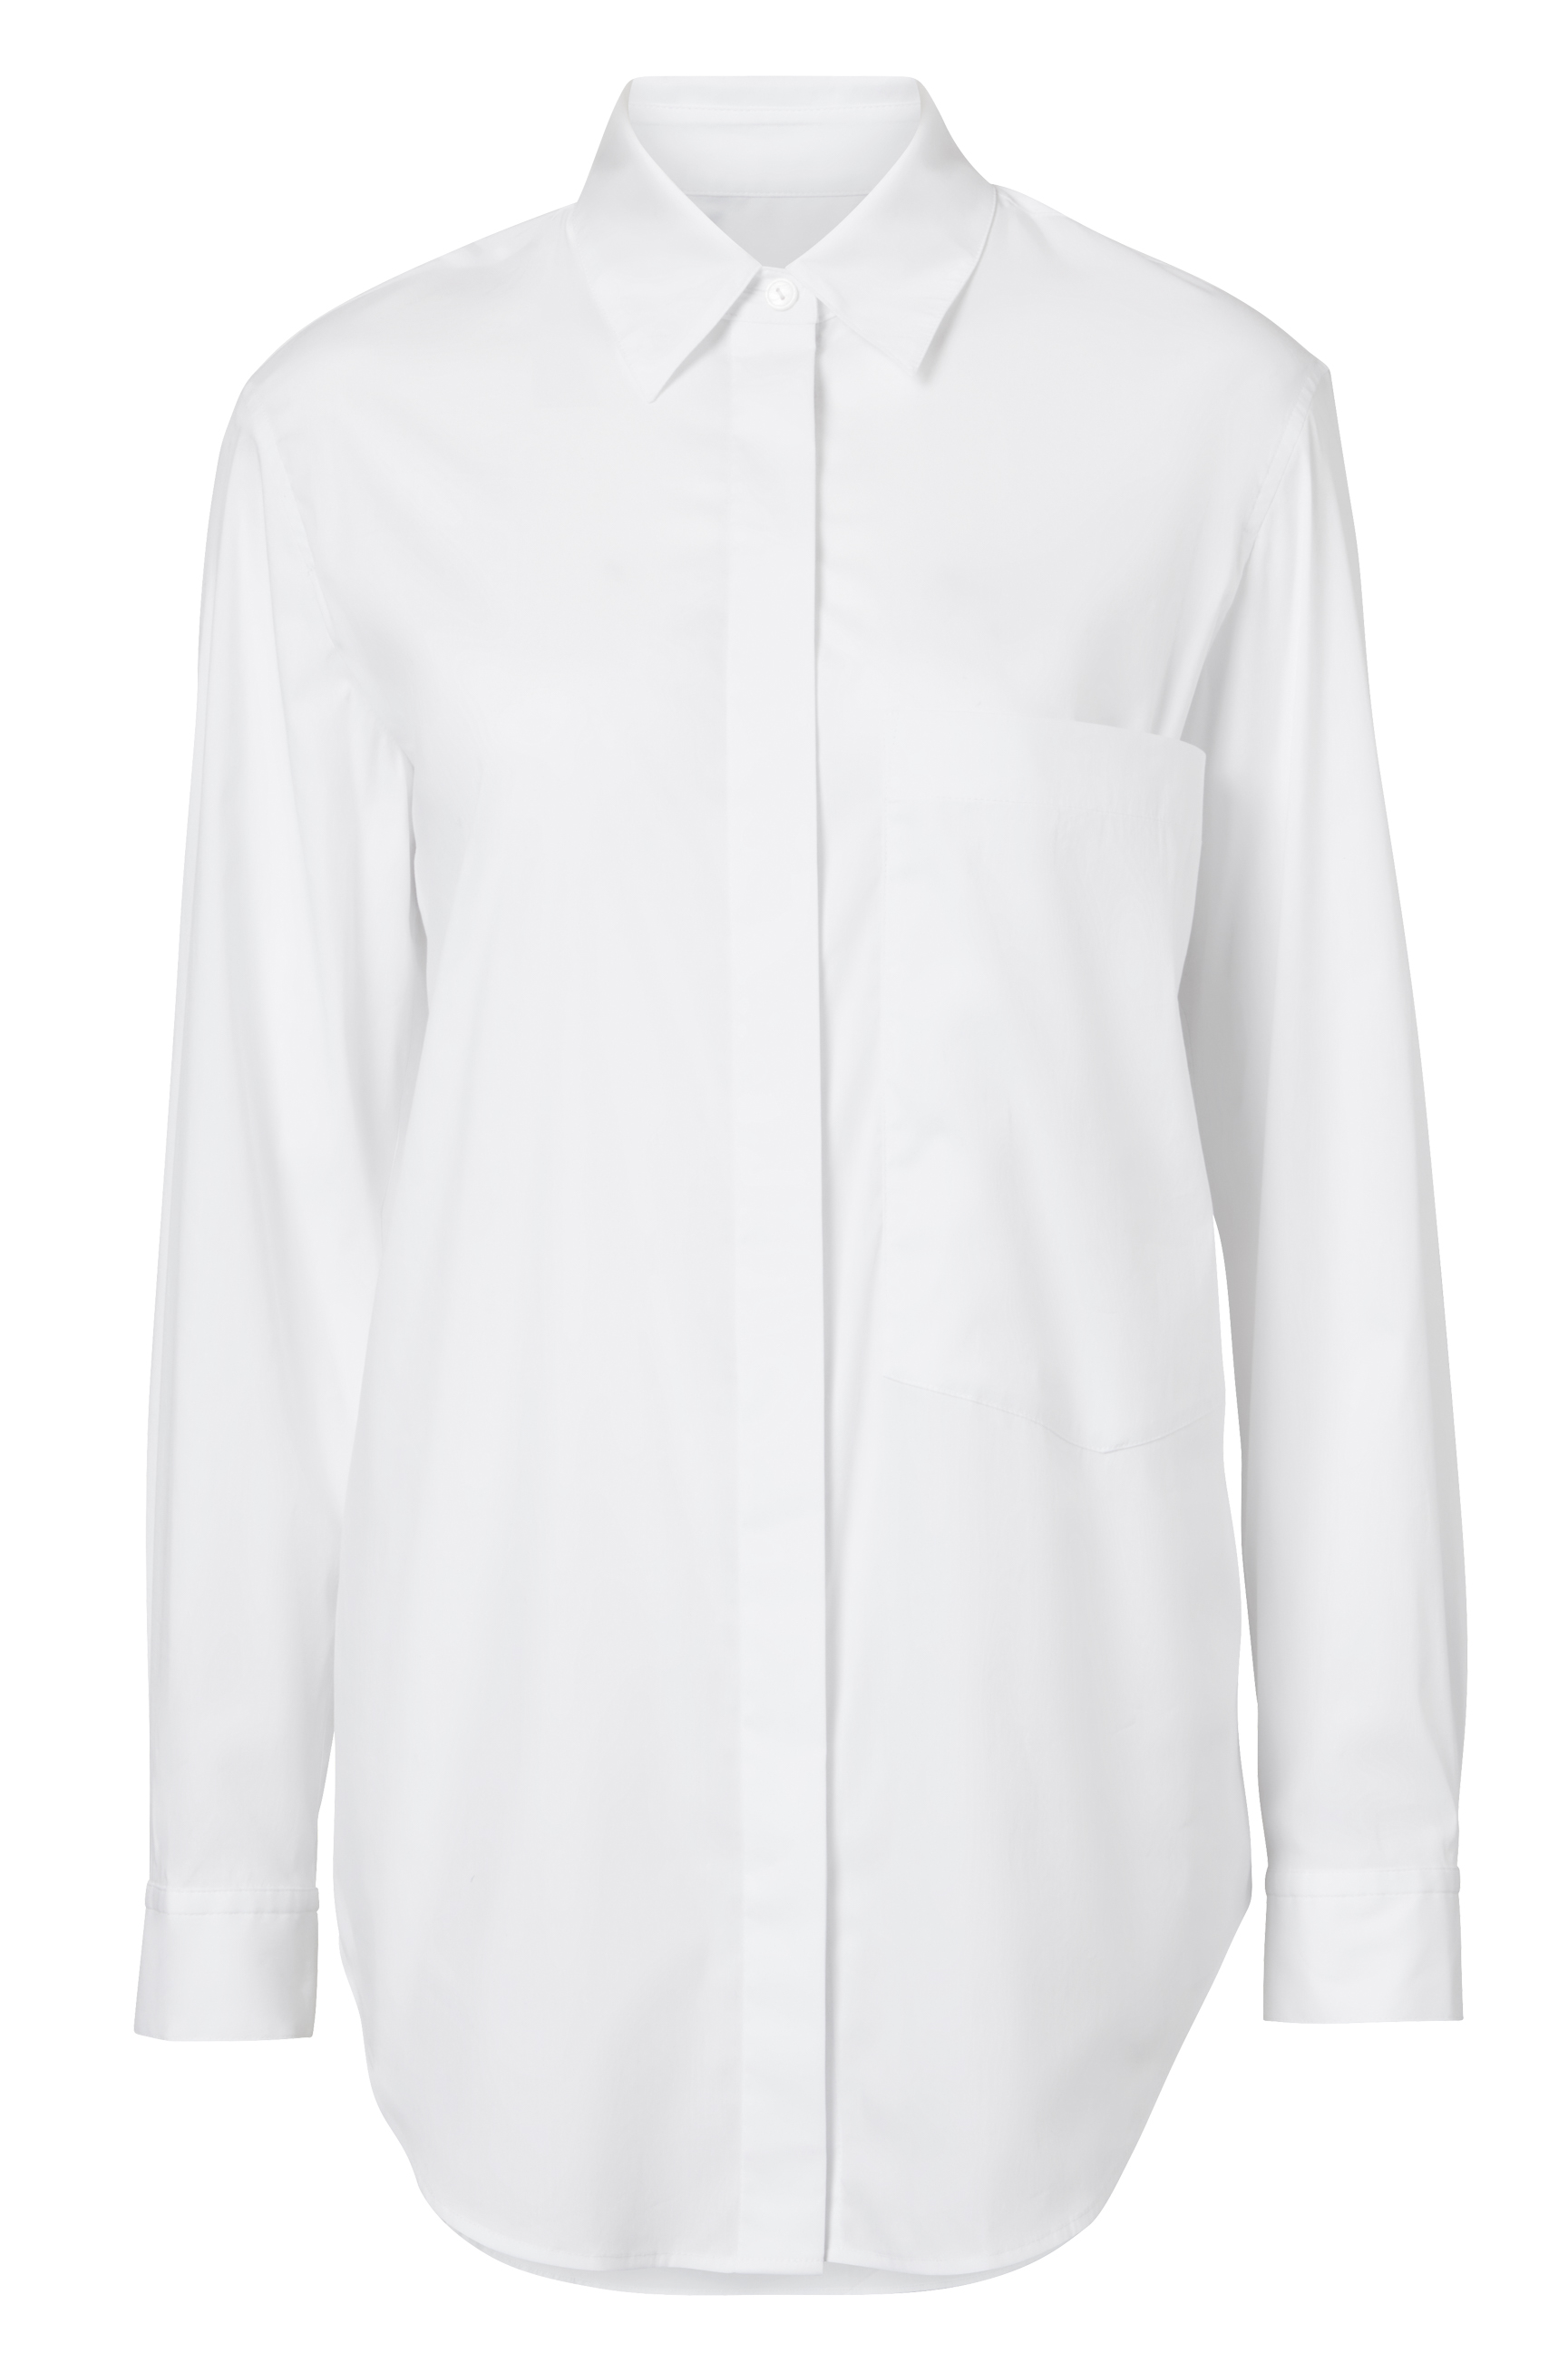 Michael Lo Sordo designed the shirt for Witchery's White Shirt Campaign